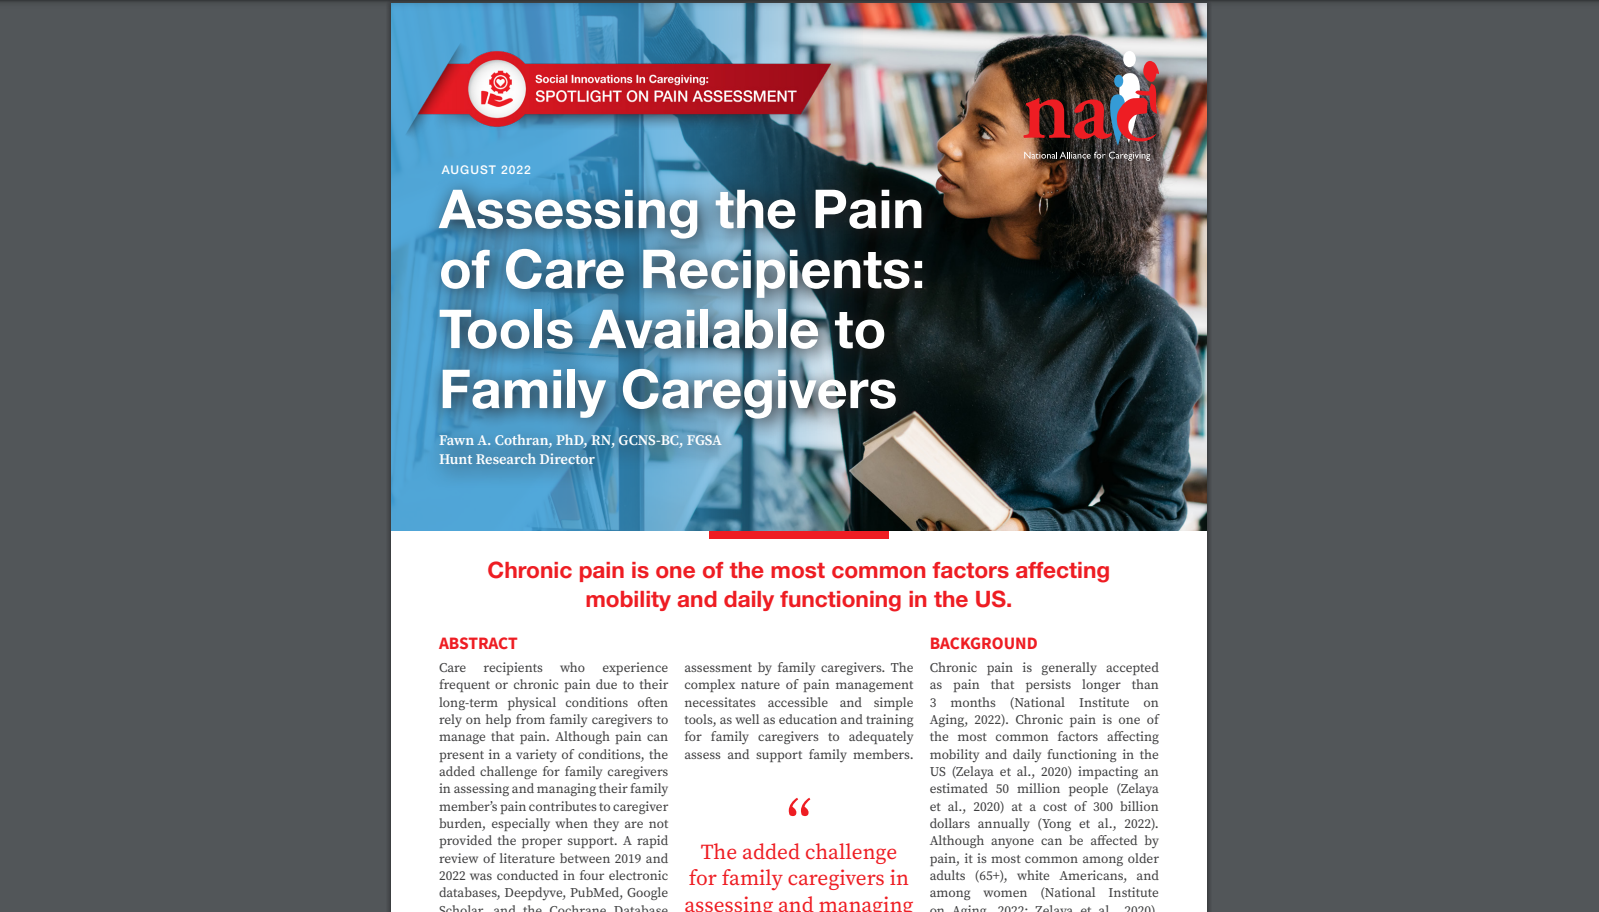 "Assessing the Pain of Care Recipients: Tools Available to Family Caregivers"